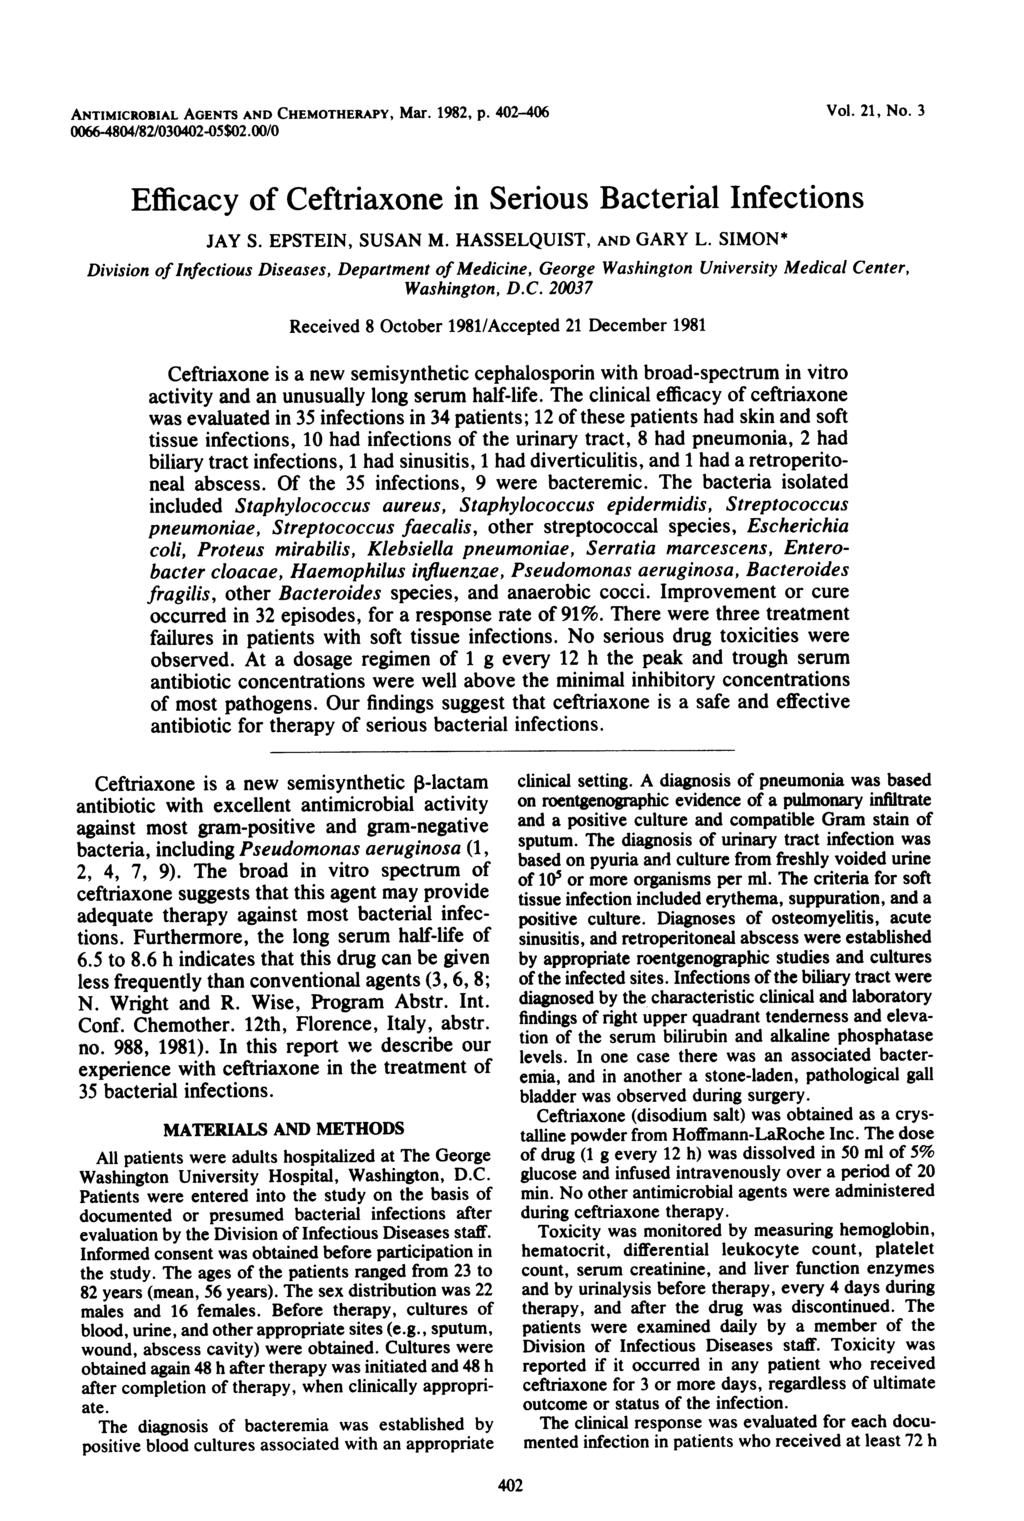 ANTIMIROBIAL AGENTS AND HEMOTHERAPY, Mar 1982, p 402-406 0066-4804/82/030402-05$0200/0 Vol 21, No 3 Efficacy of eftriaxone in Serious Bacterial Infections JAY S EPSTEIN, SUSAN M HASSELQUIST, AND GARY